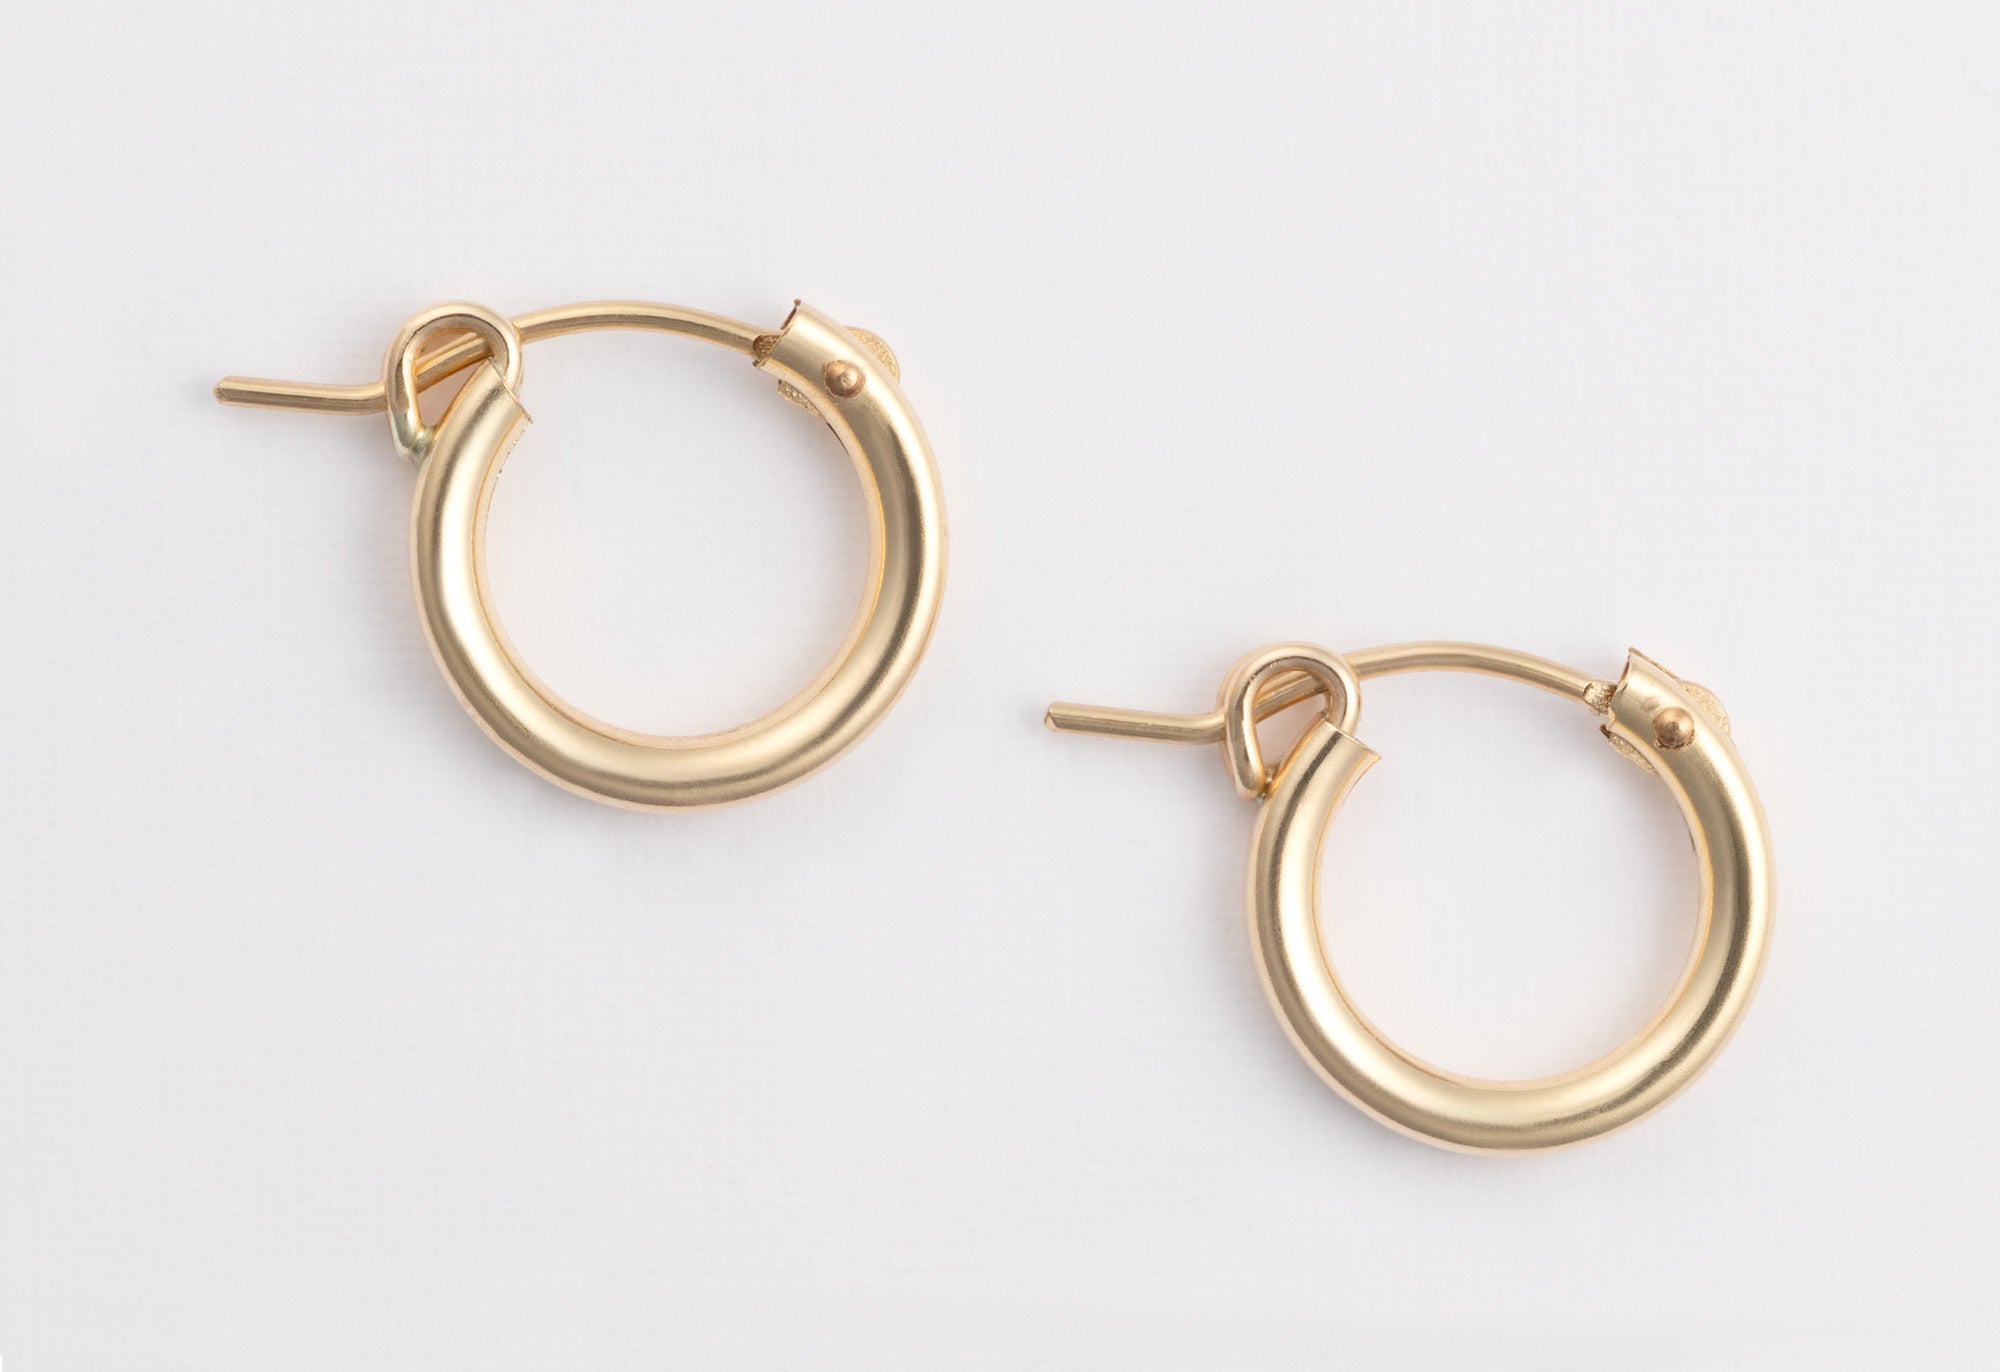 Yellow Gold Charm Hoop Earrings on White Textured Paper